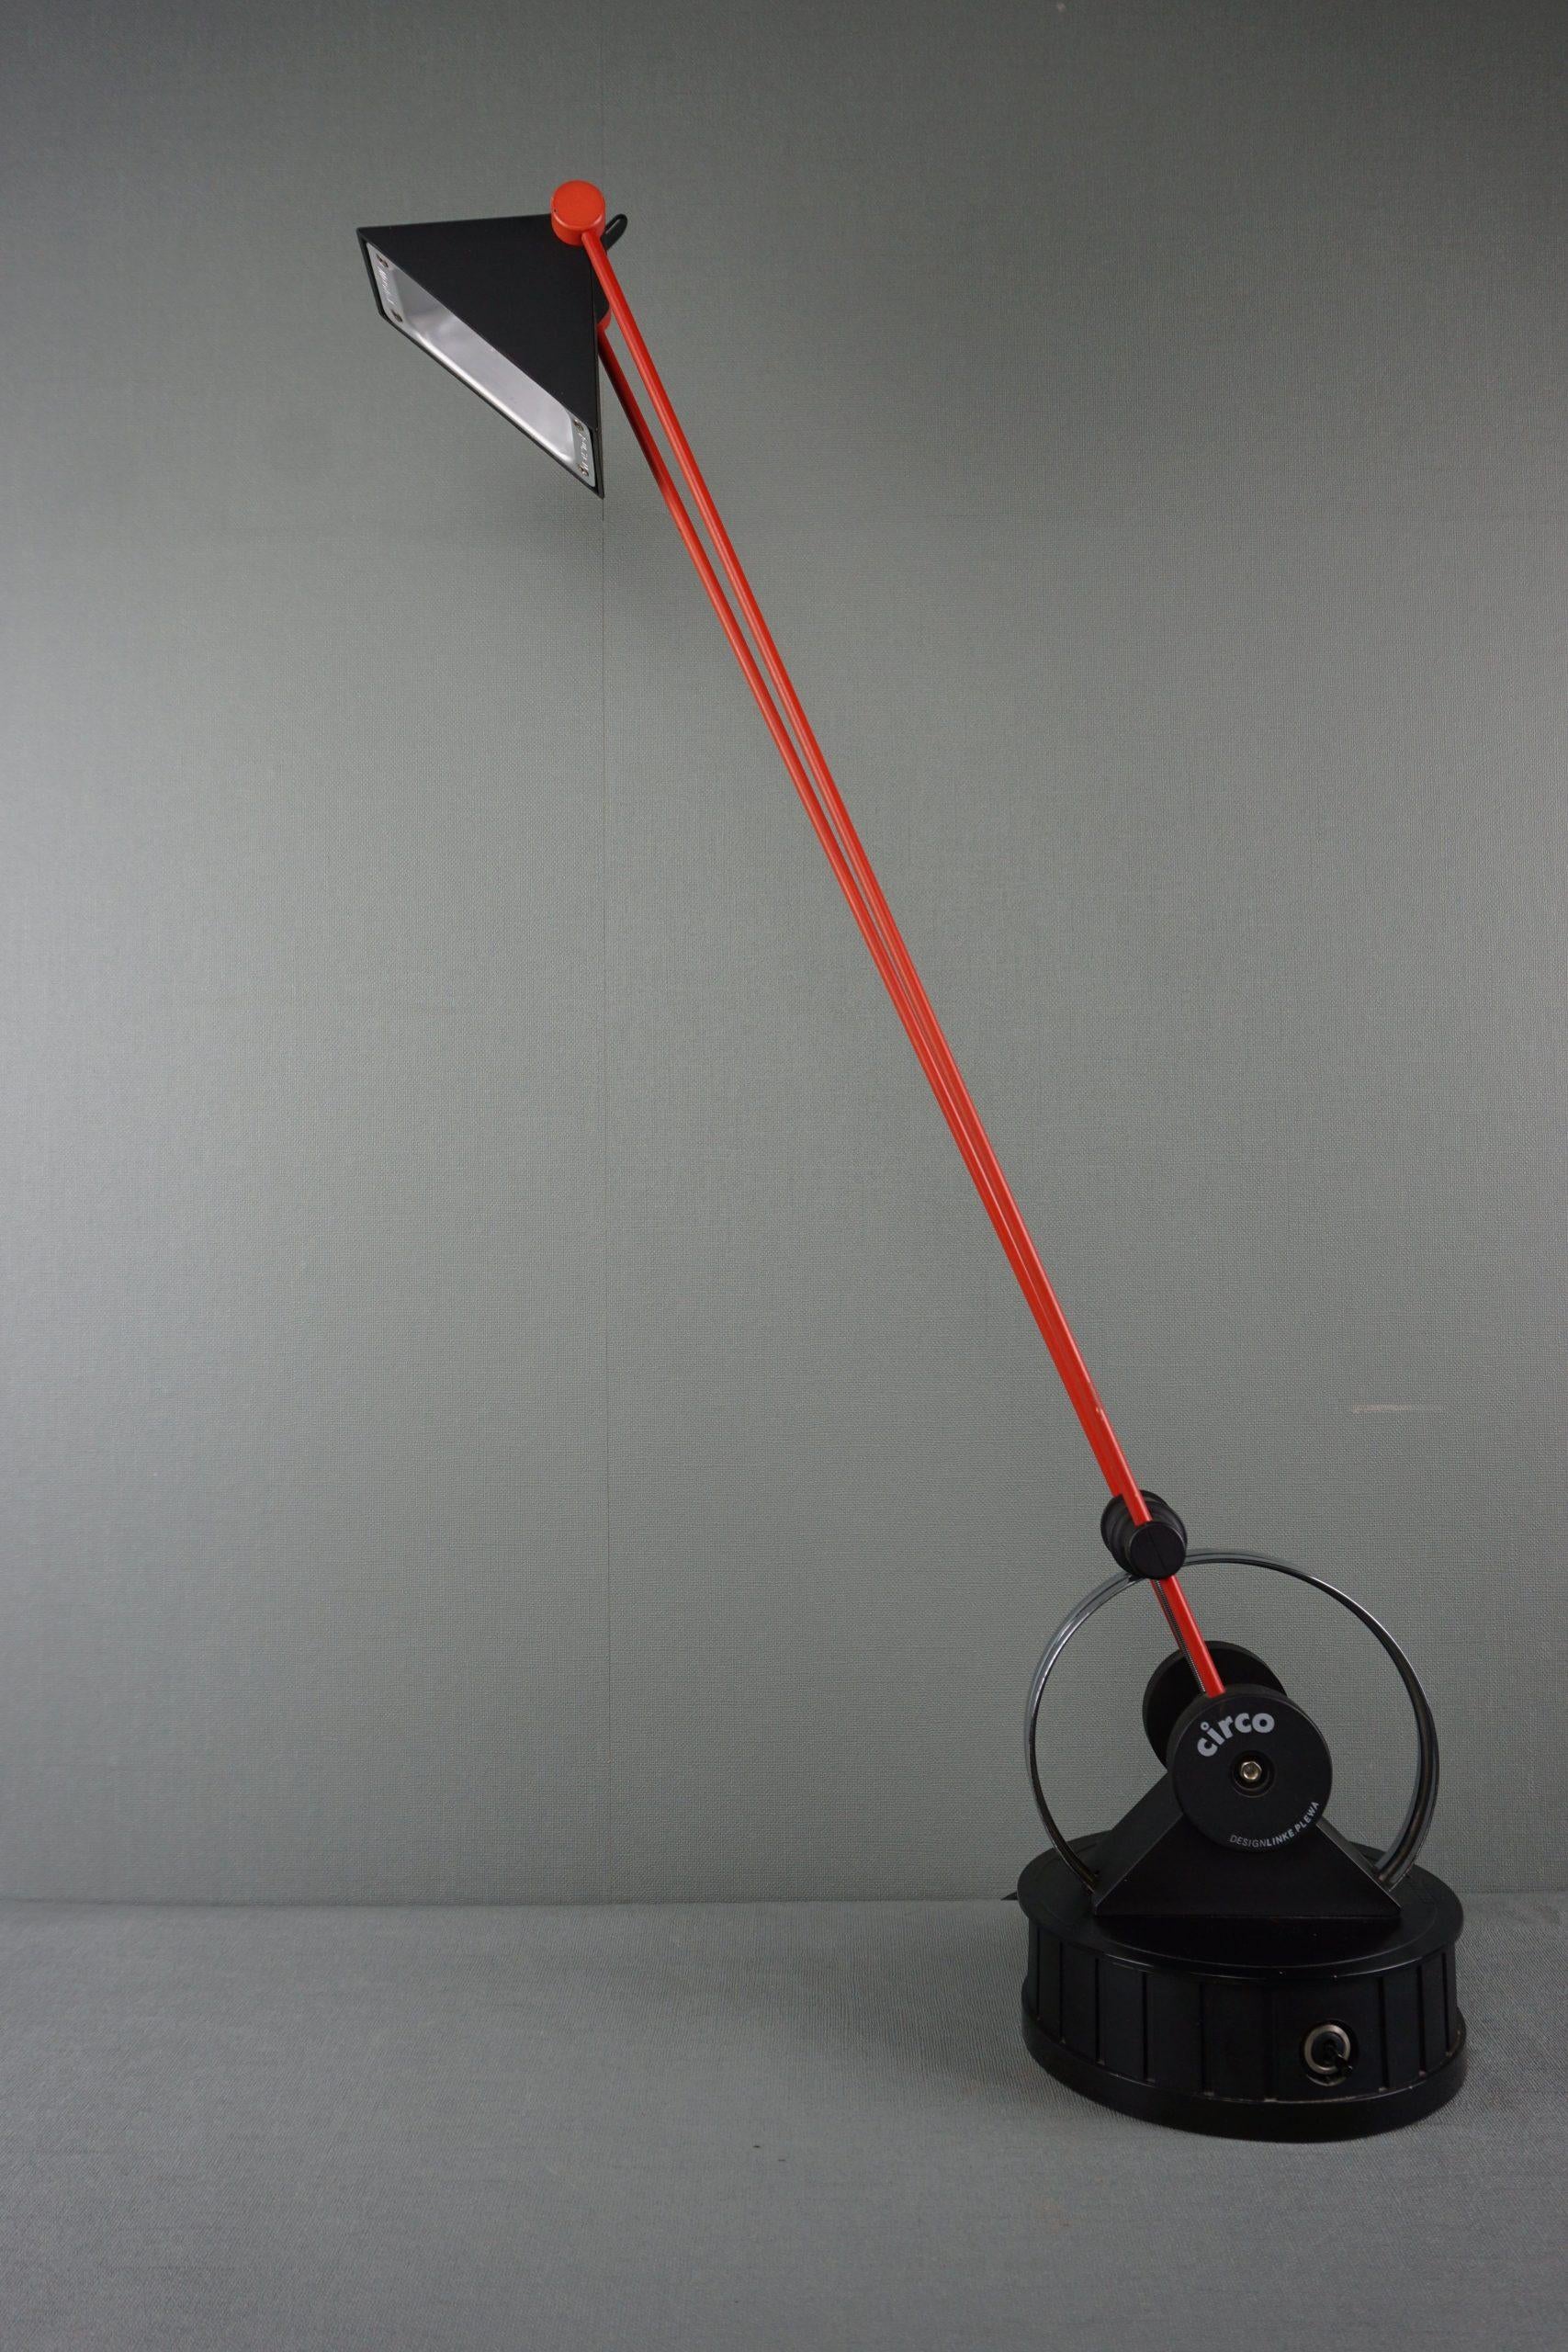 Circo Desk Lamp by Linke Plewa for Leuchten, 1980s In Good Condition For Sale In Harderwijk, NL